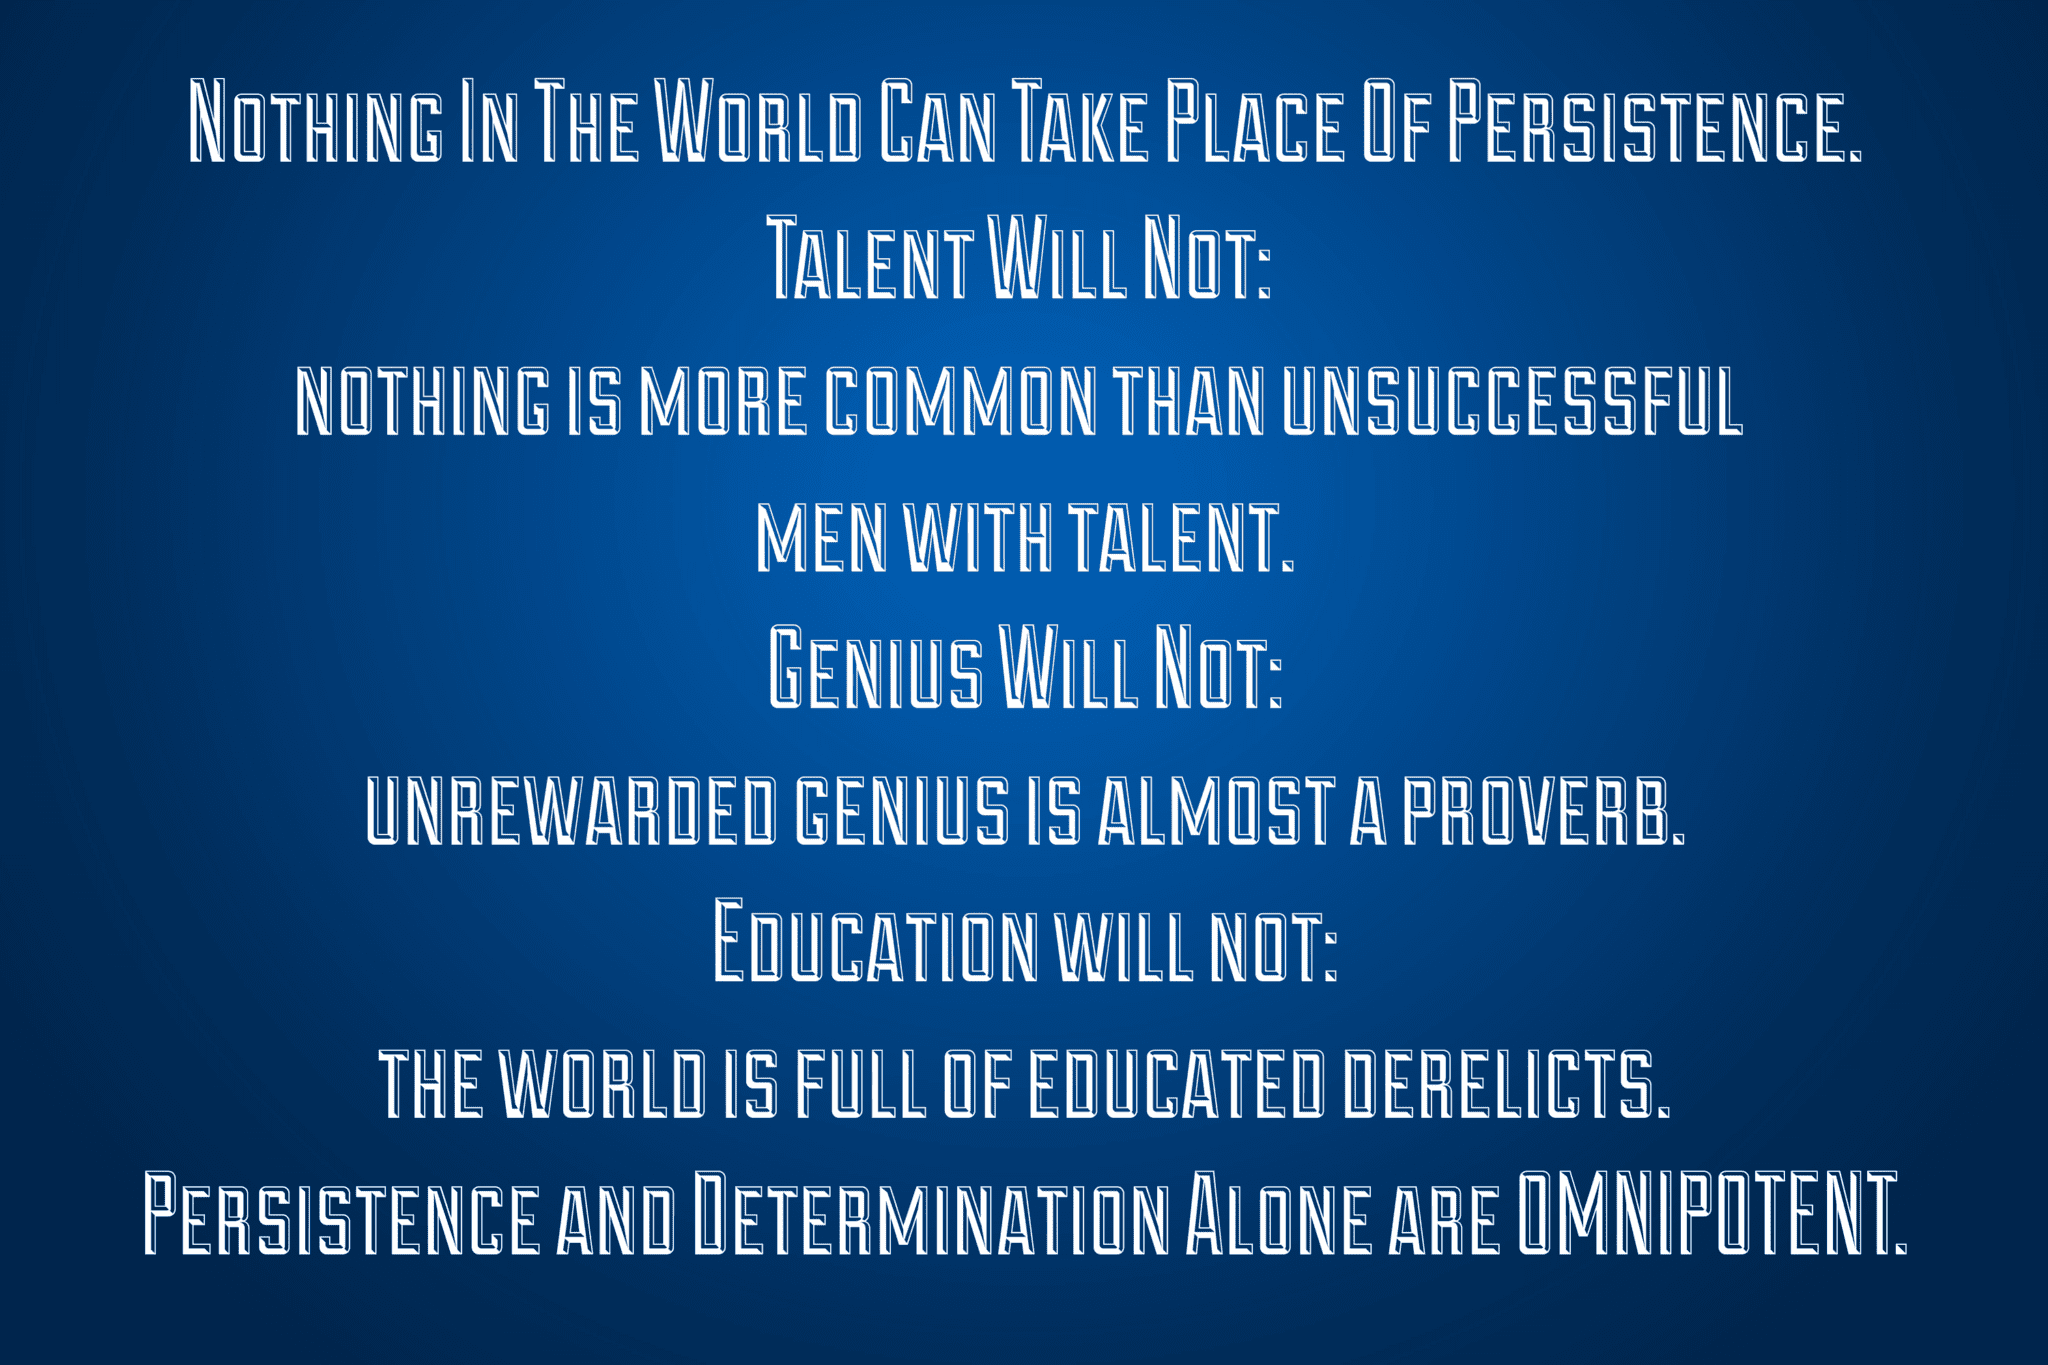 Determination and Persistence by Calvin Coolidge